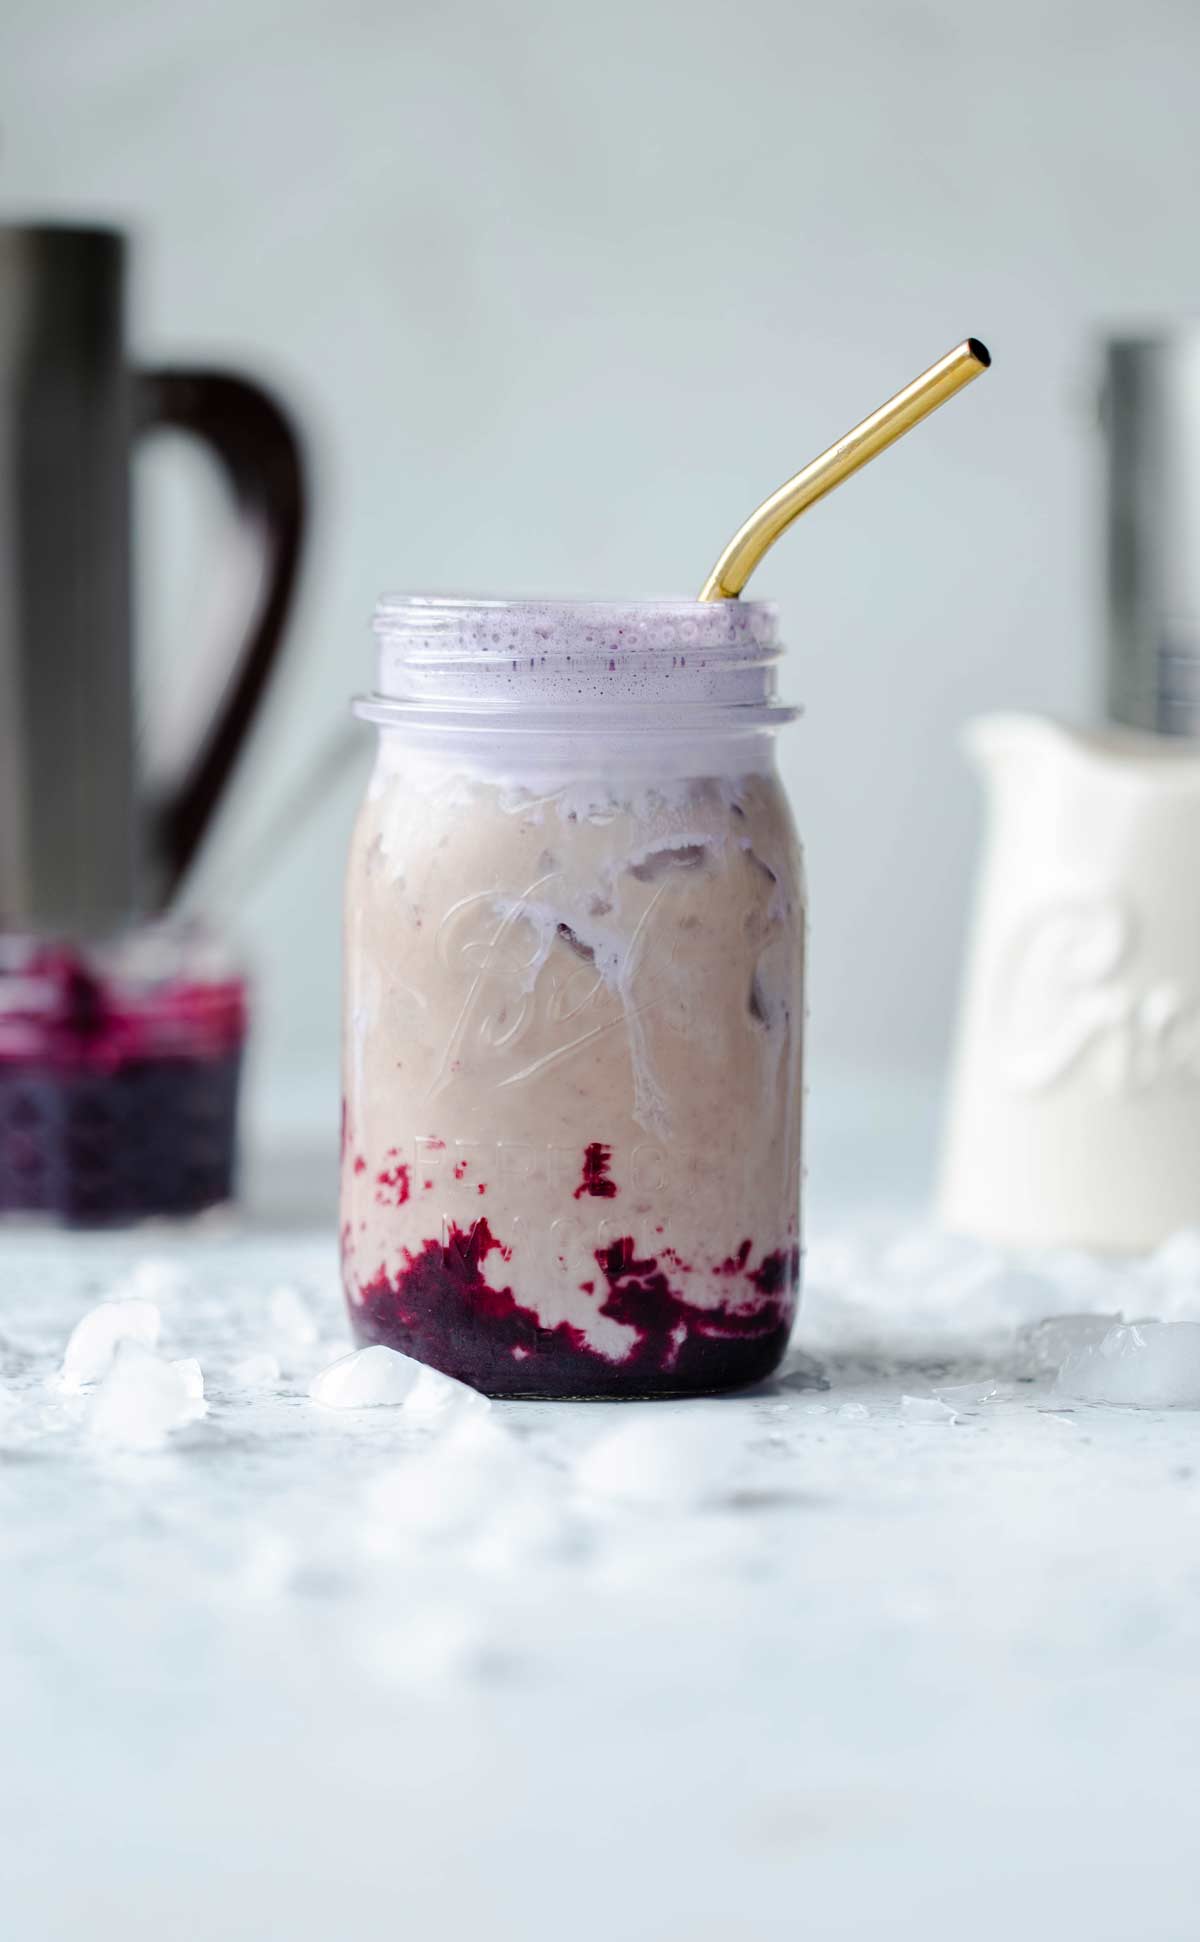 Iced Cinnamon Brown Sugar Blueberry Coffee is a fruity iced coffee recipe sweetened with blueberry brown sugar puree and topped with a layer of luscious blueberry cold foam soft top.